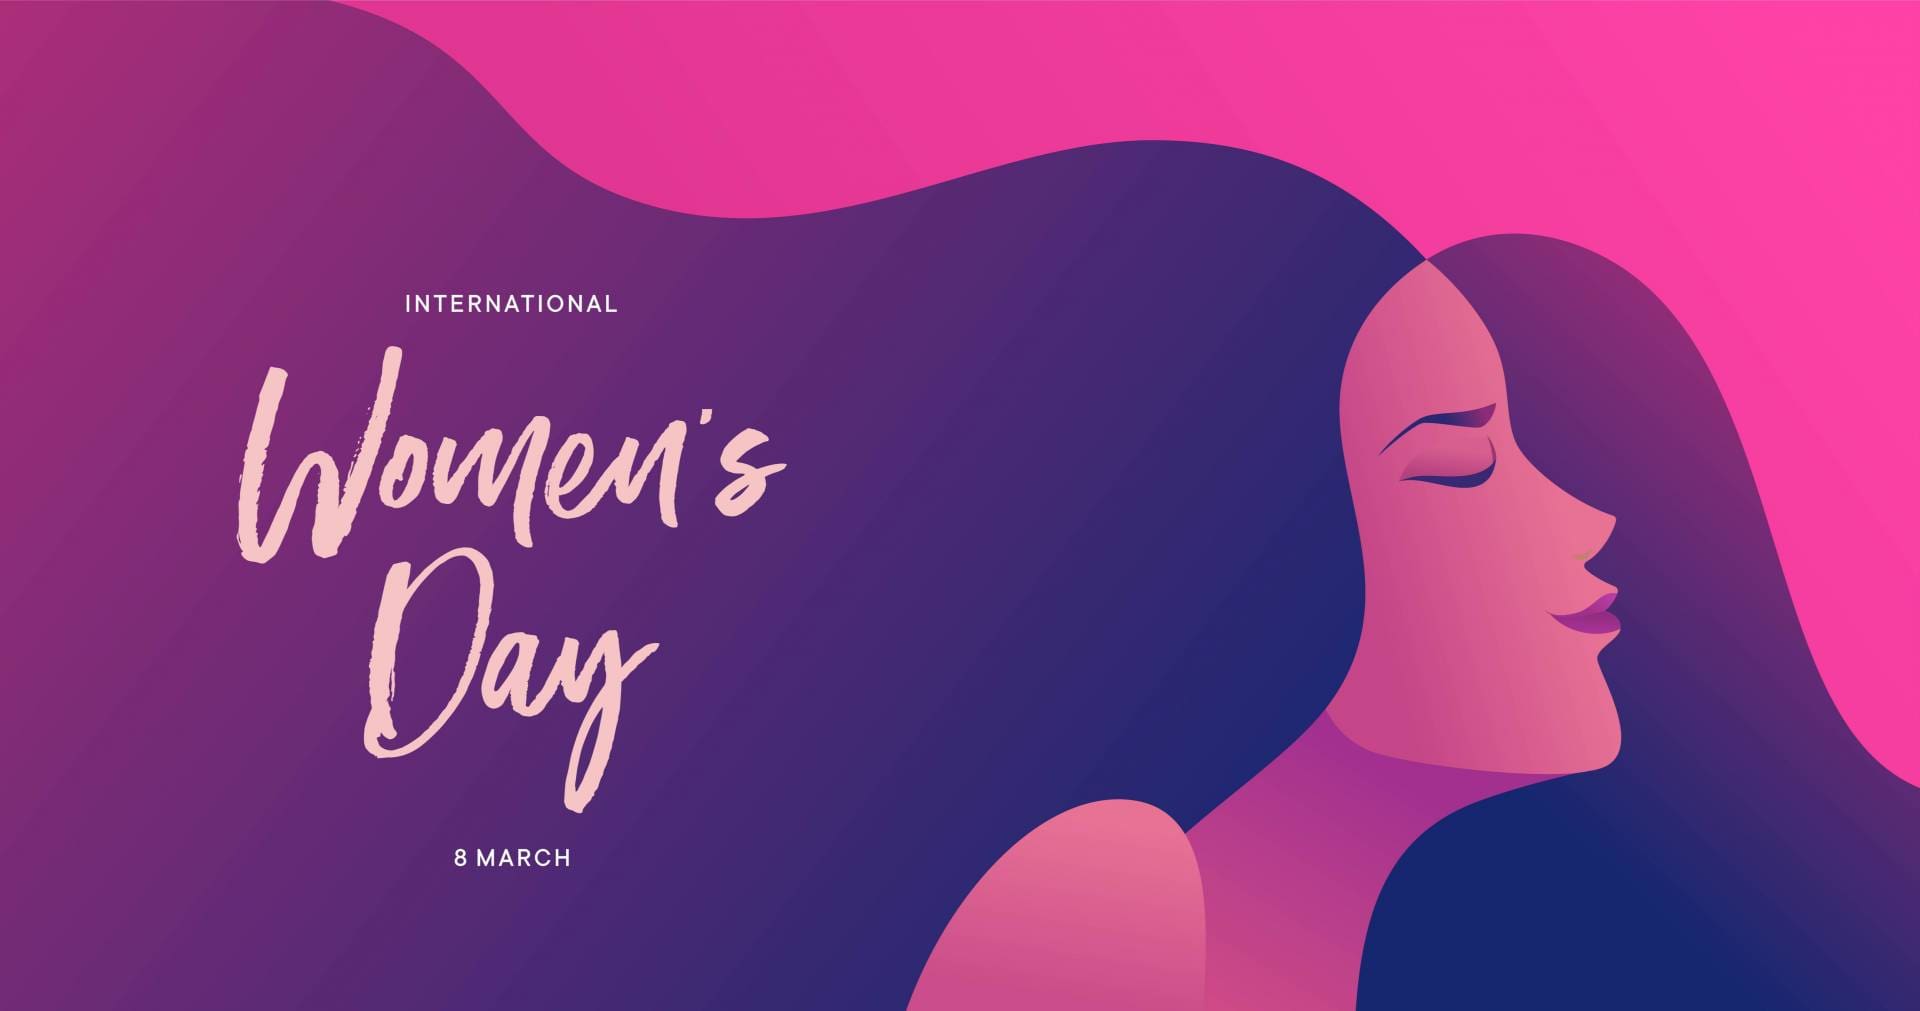 International women's day is March 8th